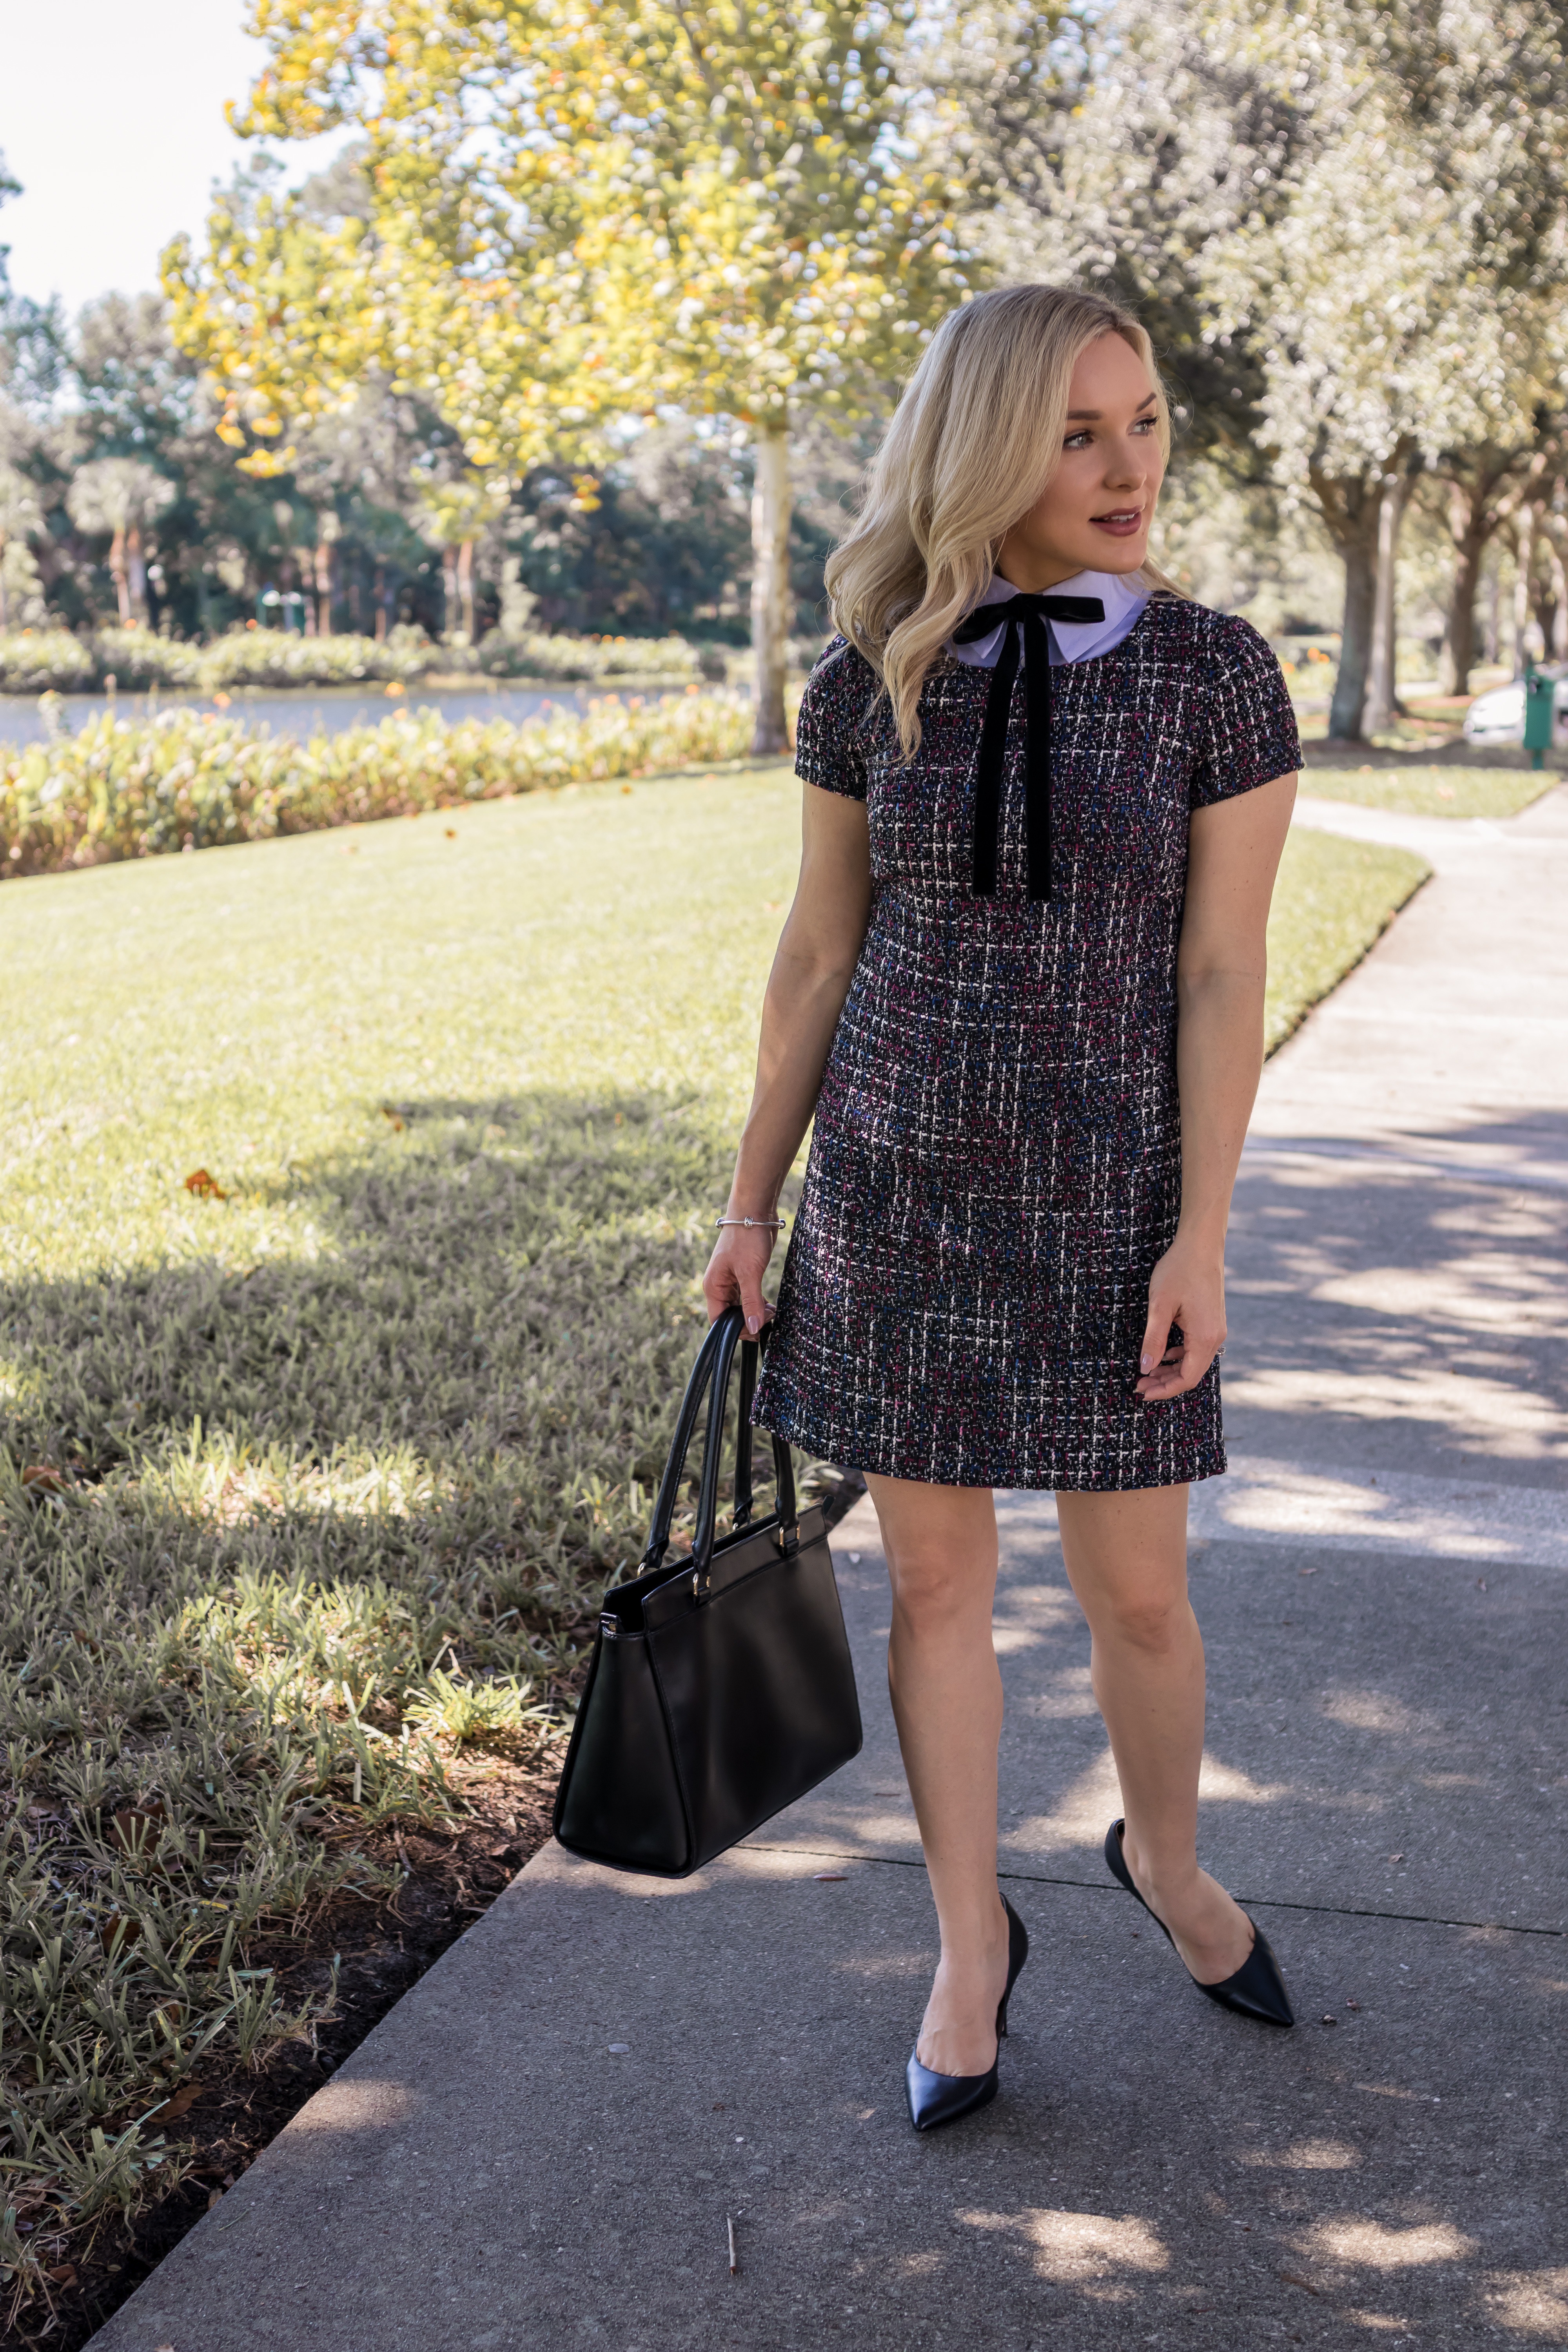 Summer Wind: Tweed Coat and Shift Dress for Fall